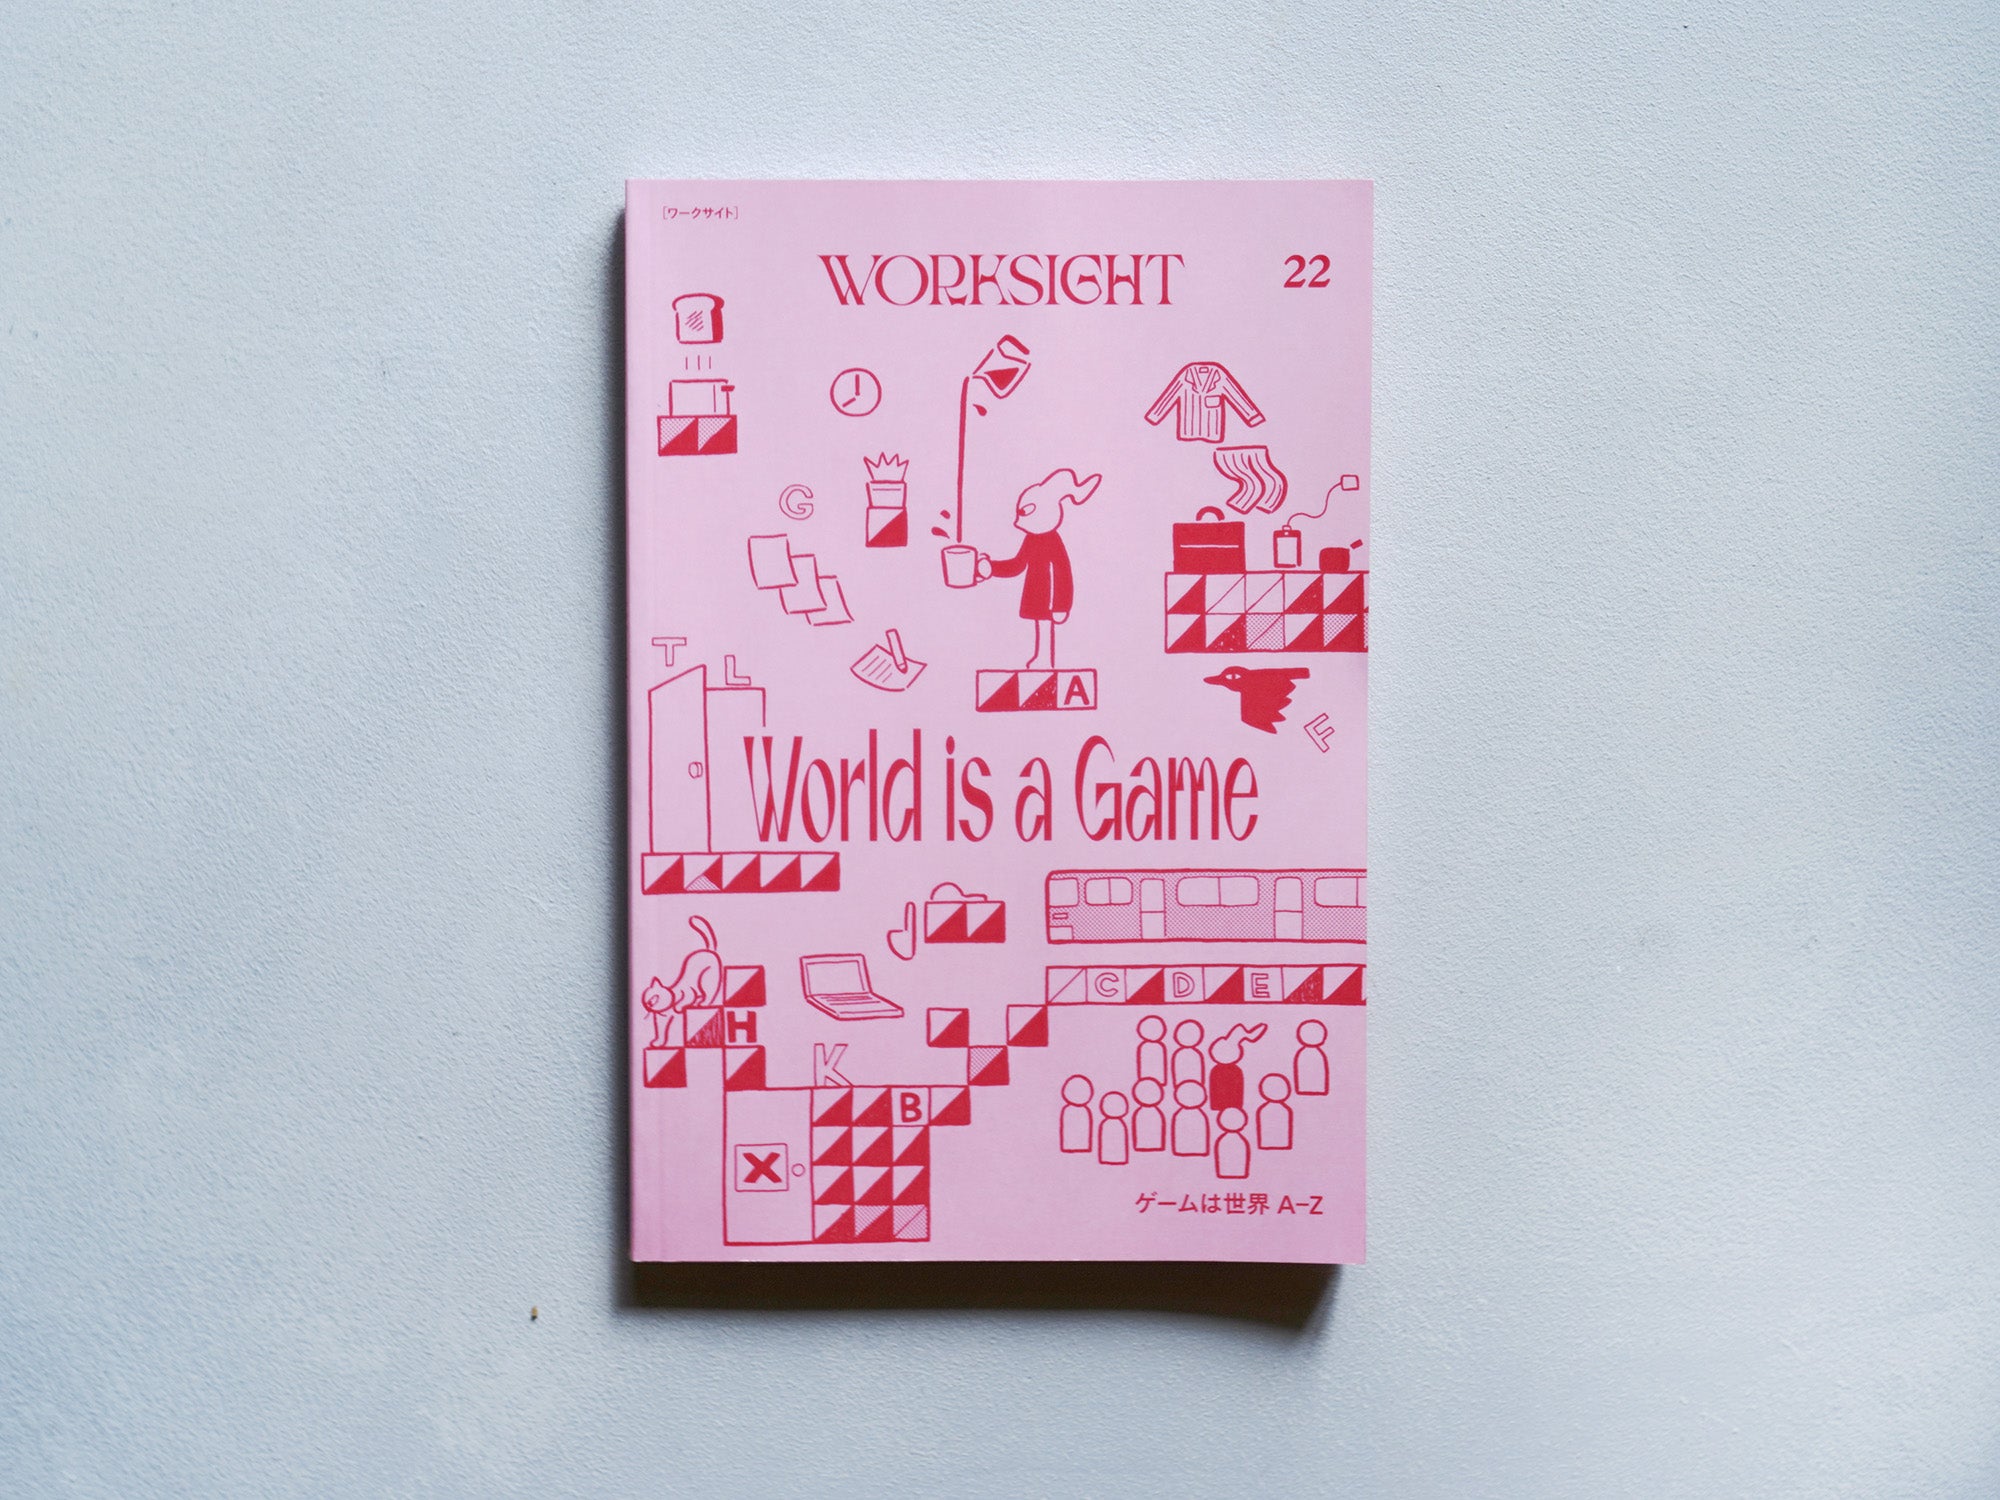 WORKSIGHT［ワークサイト］22号　ゲームは世界 A–Z　World is a Game